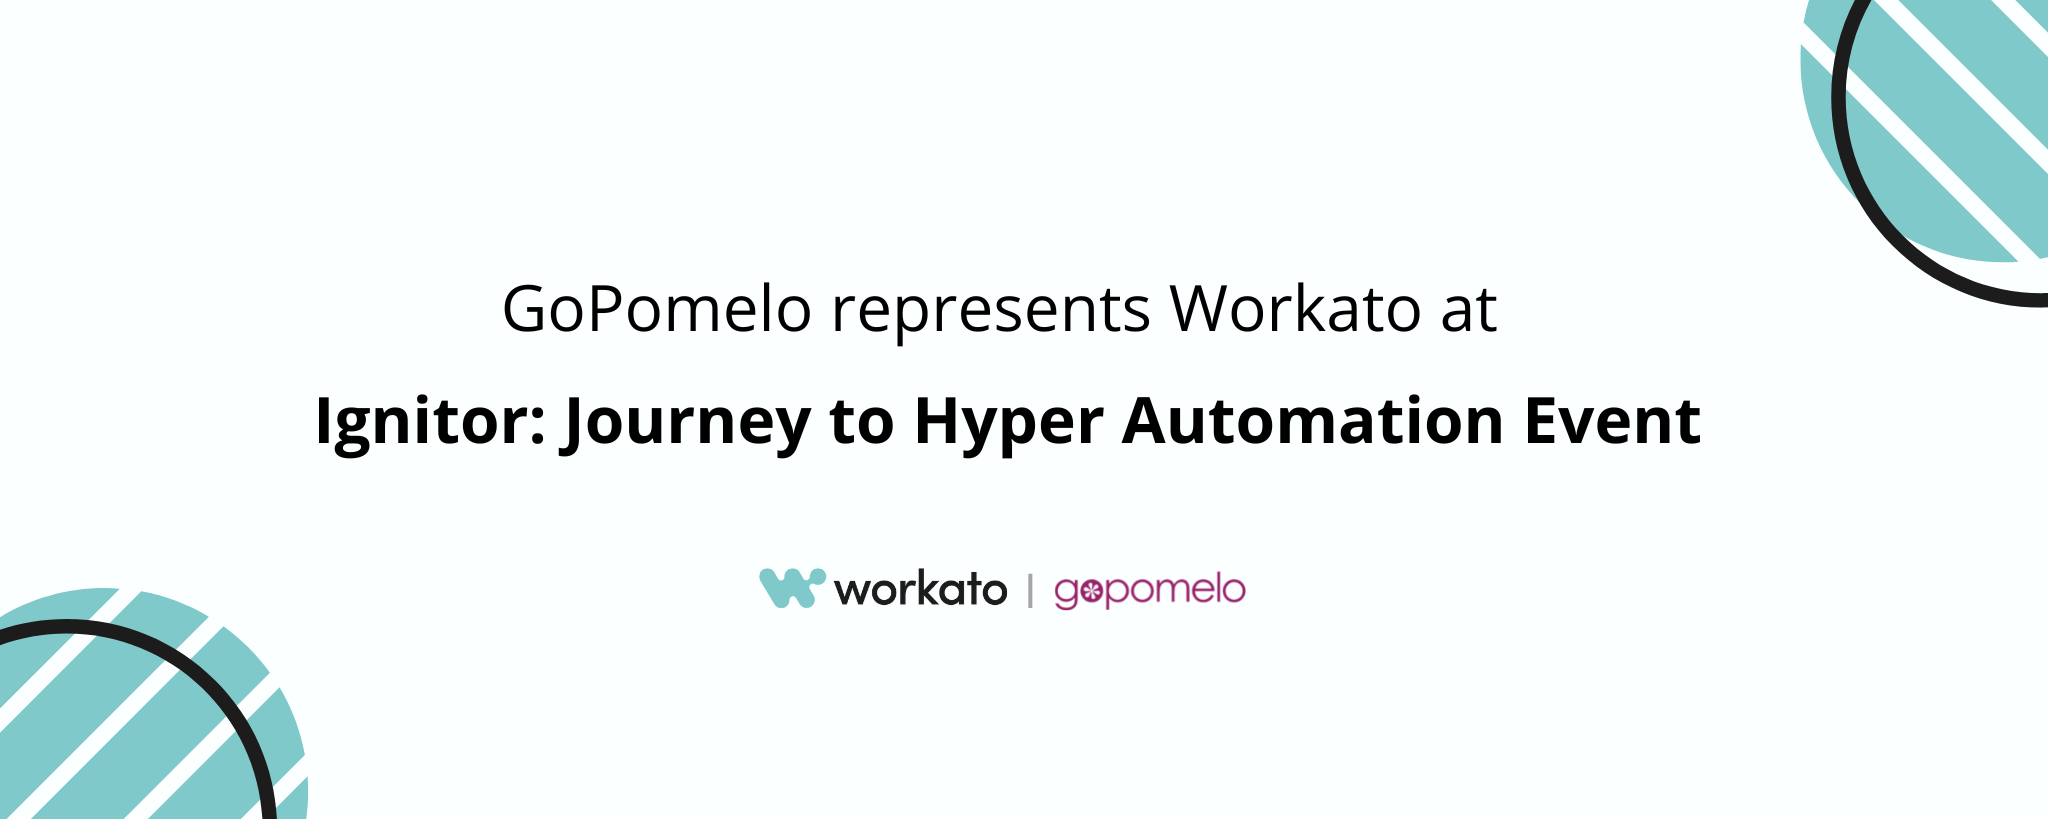 GoPomelo represents Workato at Ignitor: Journey to Hyper Automation Event